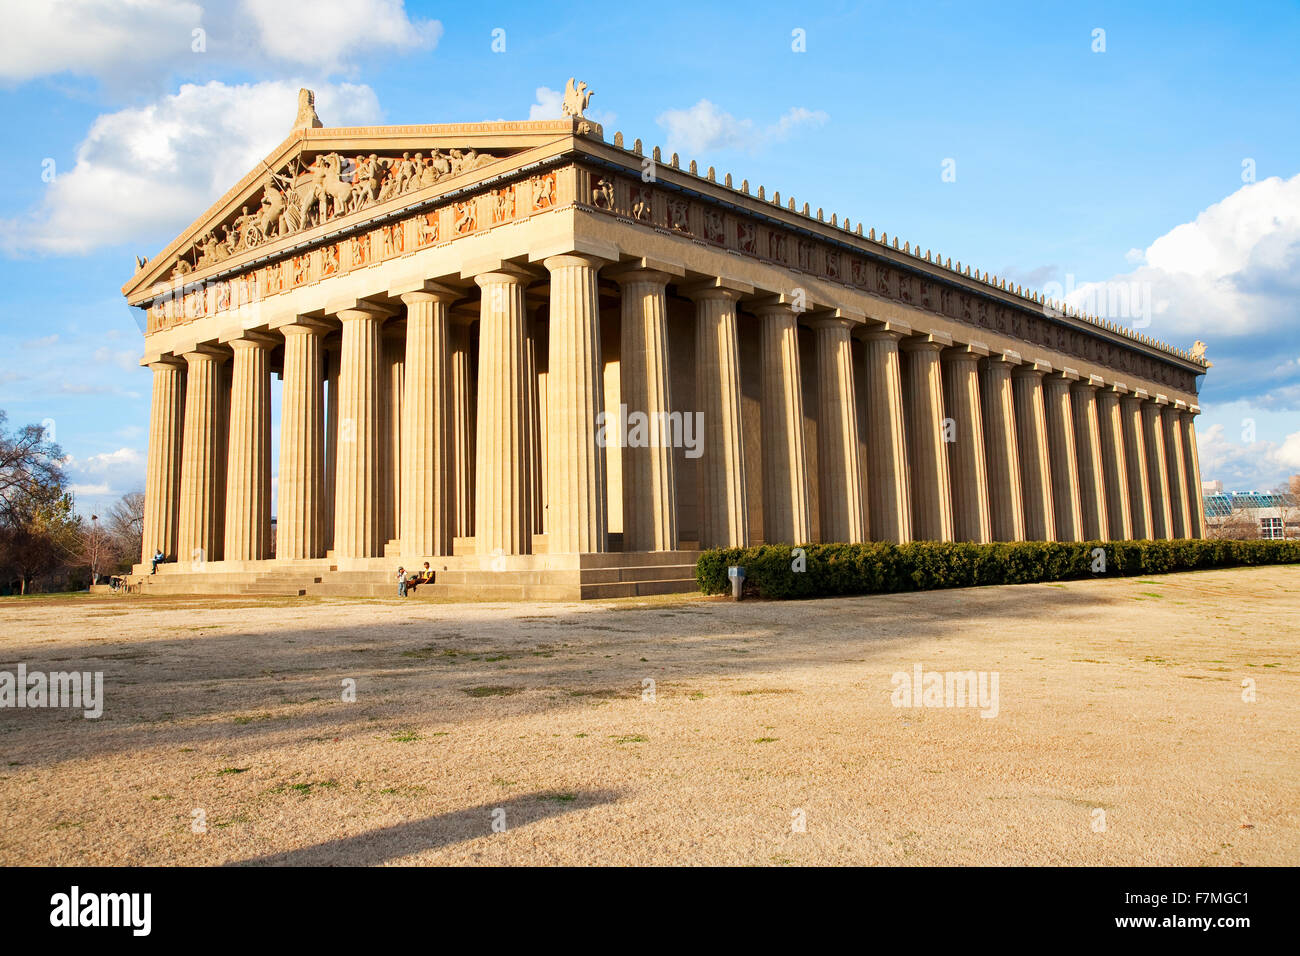 The Parthenon, Nashville, Tennessee, Centennial park, Full scale replica of Greek Parthenon at sunset Stock Photo